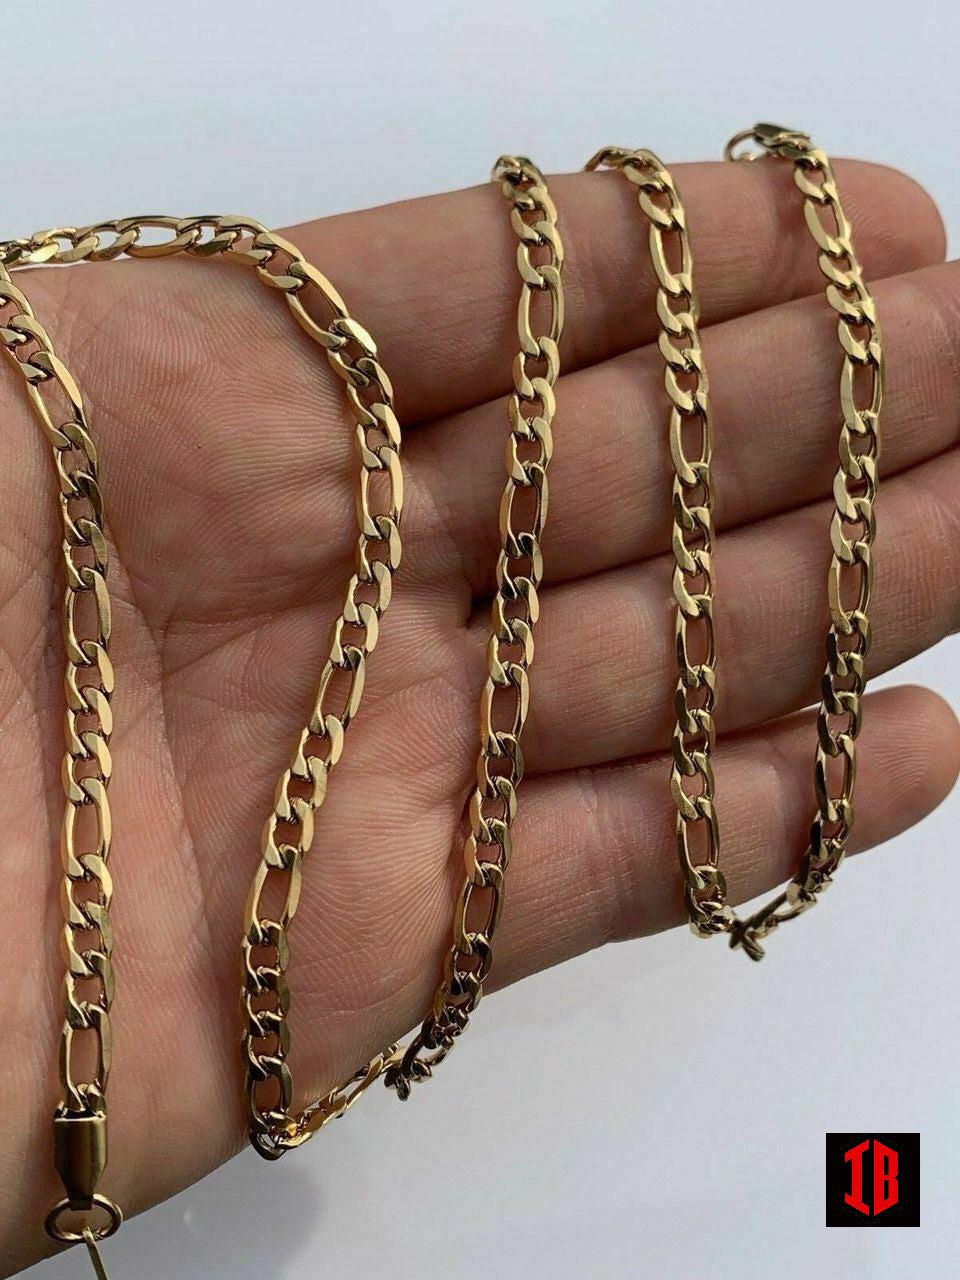 Men's Gold Figaro Chain 5mm 14k Yellow Gold Over Stainless Steel 18-30" Lengths